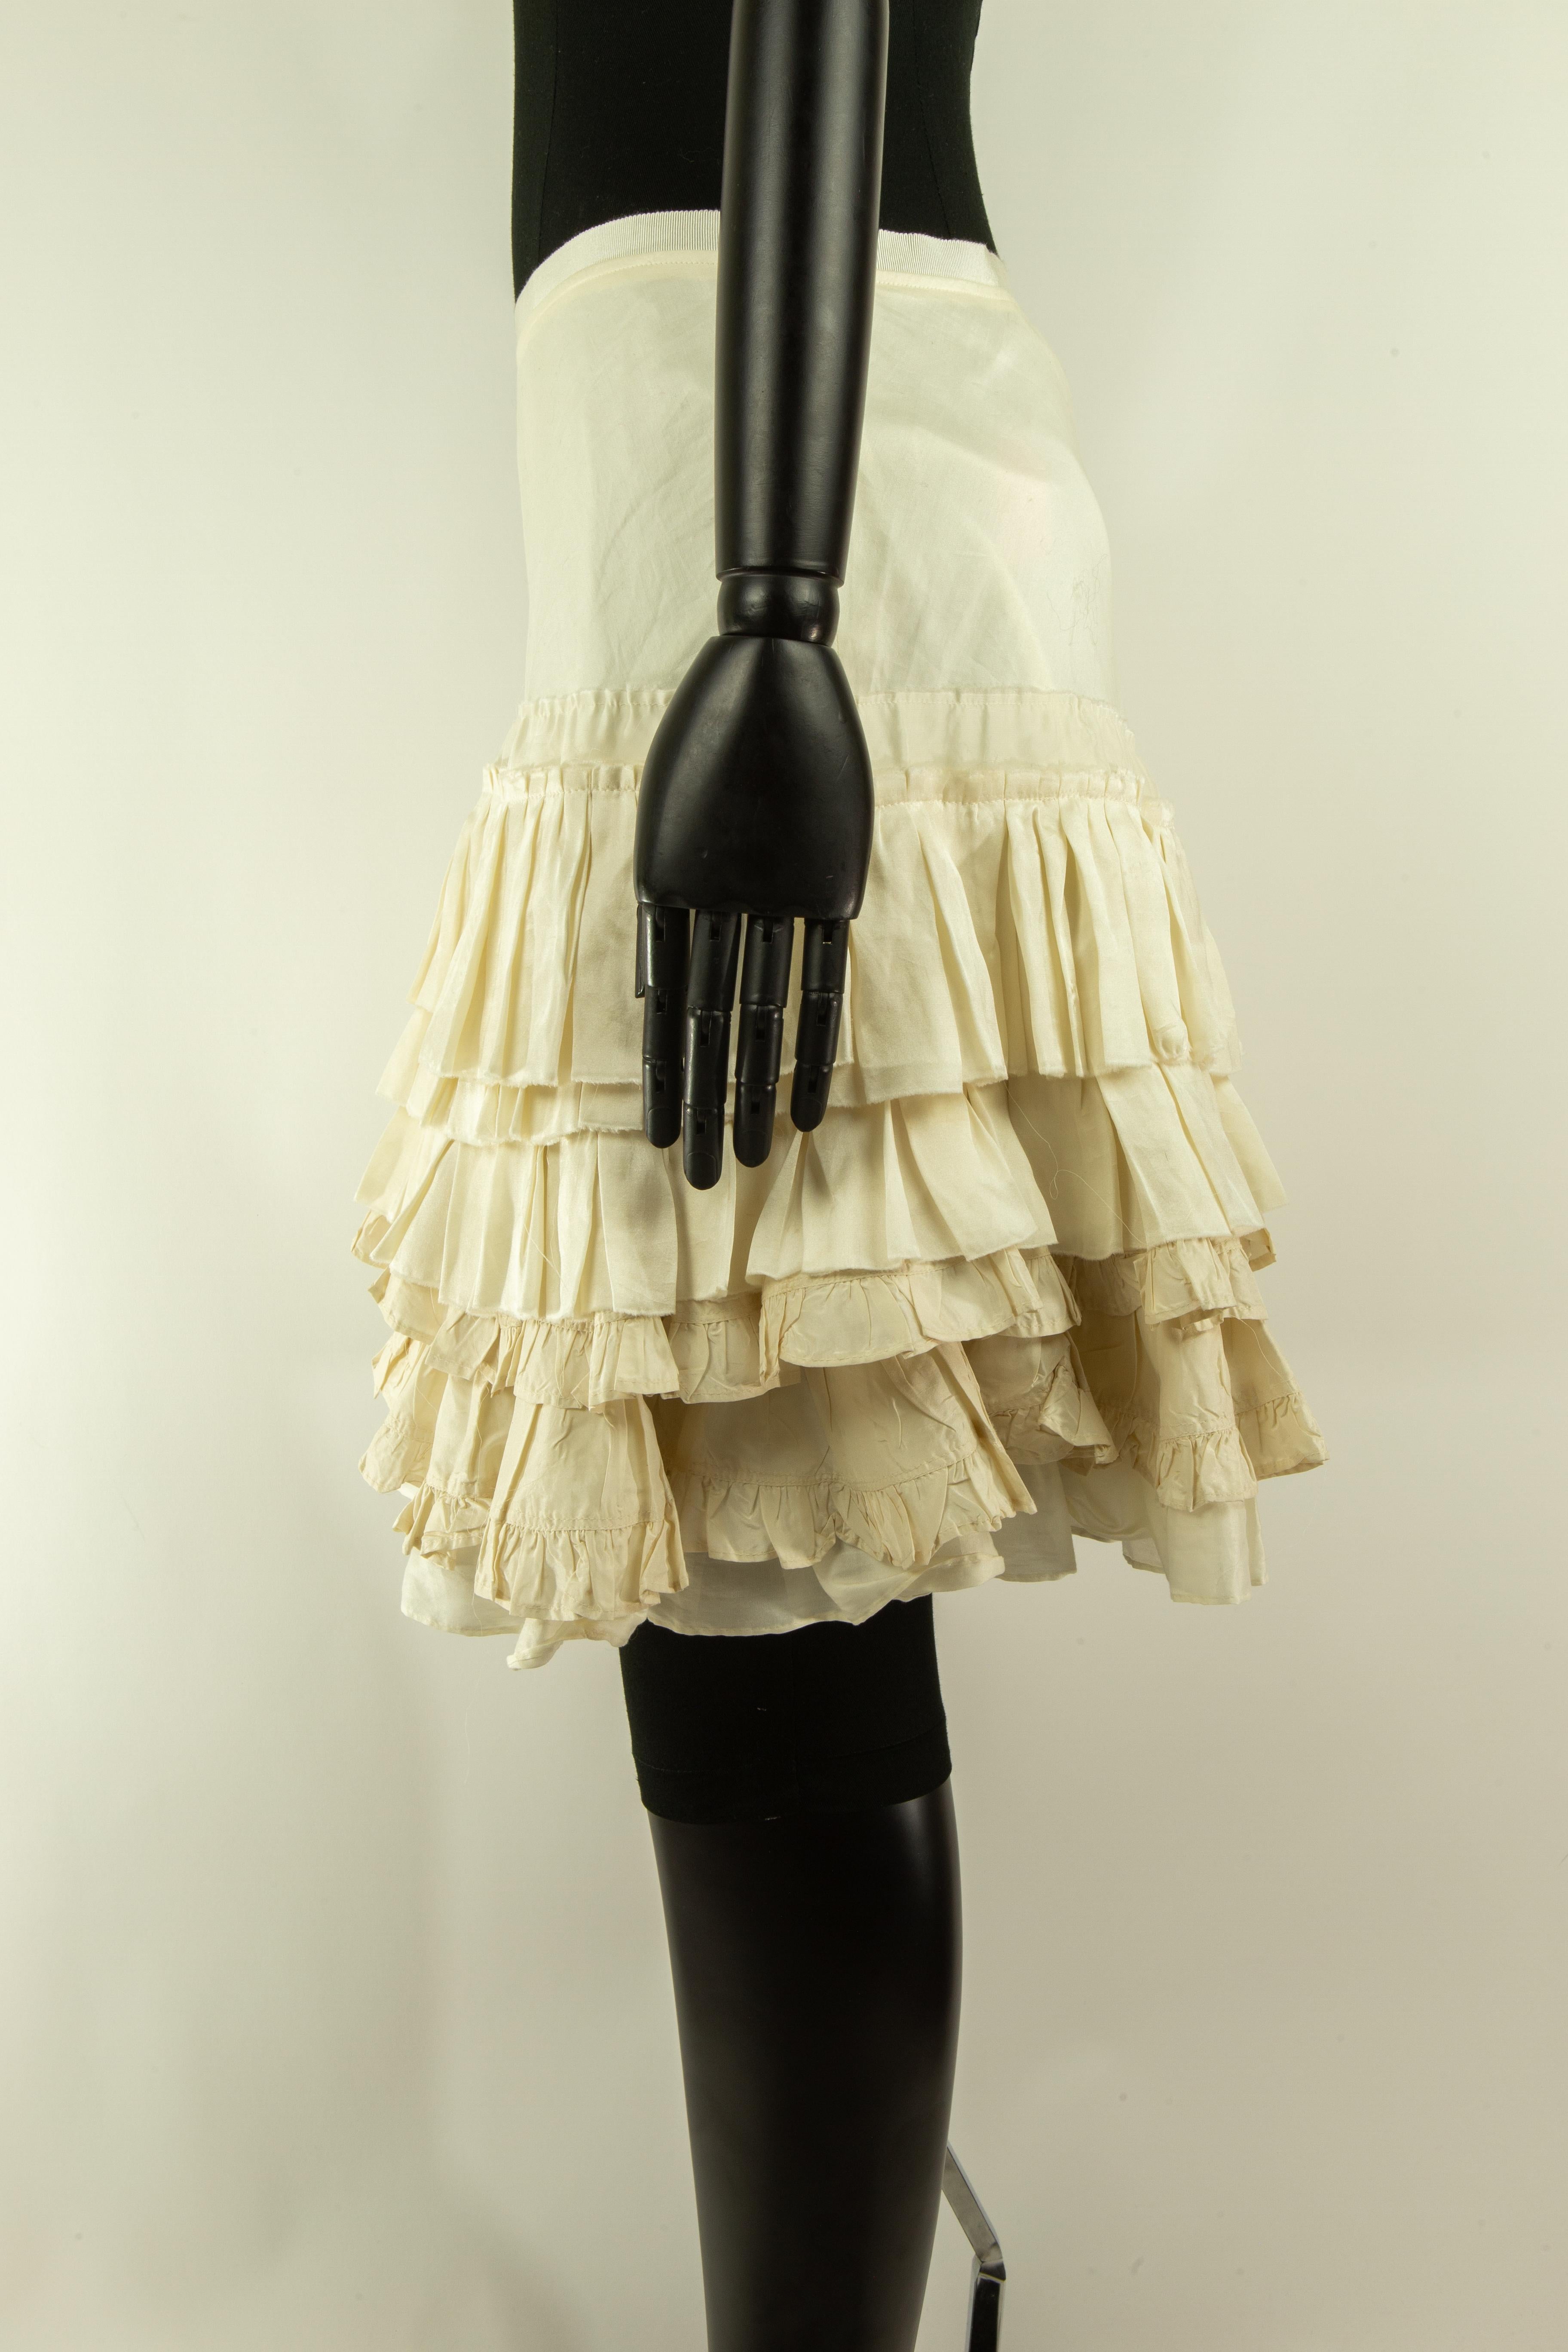 A Chloé pearl white skirt from the mid-2000s adorned in tiered ruffles from the hip down. The skirt is mid-thigh length fastened with a zip along the centre back. 
